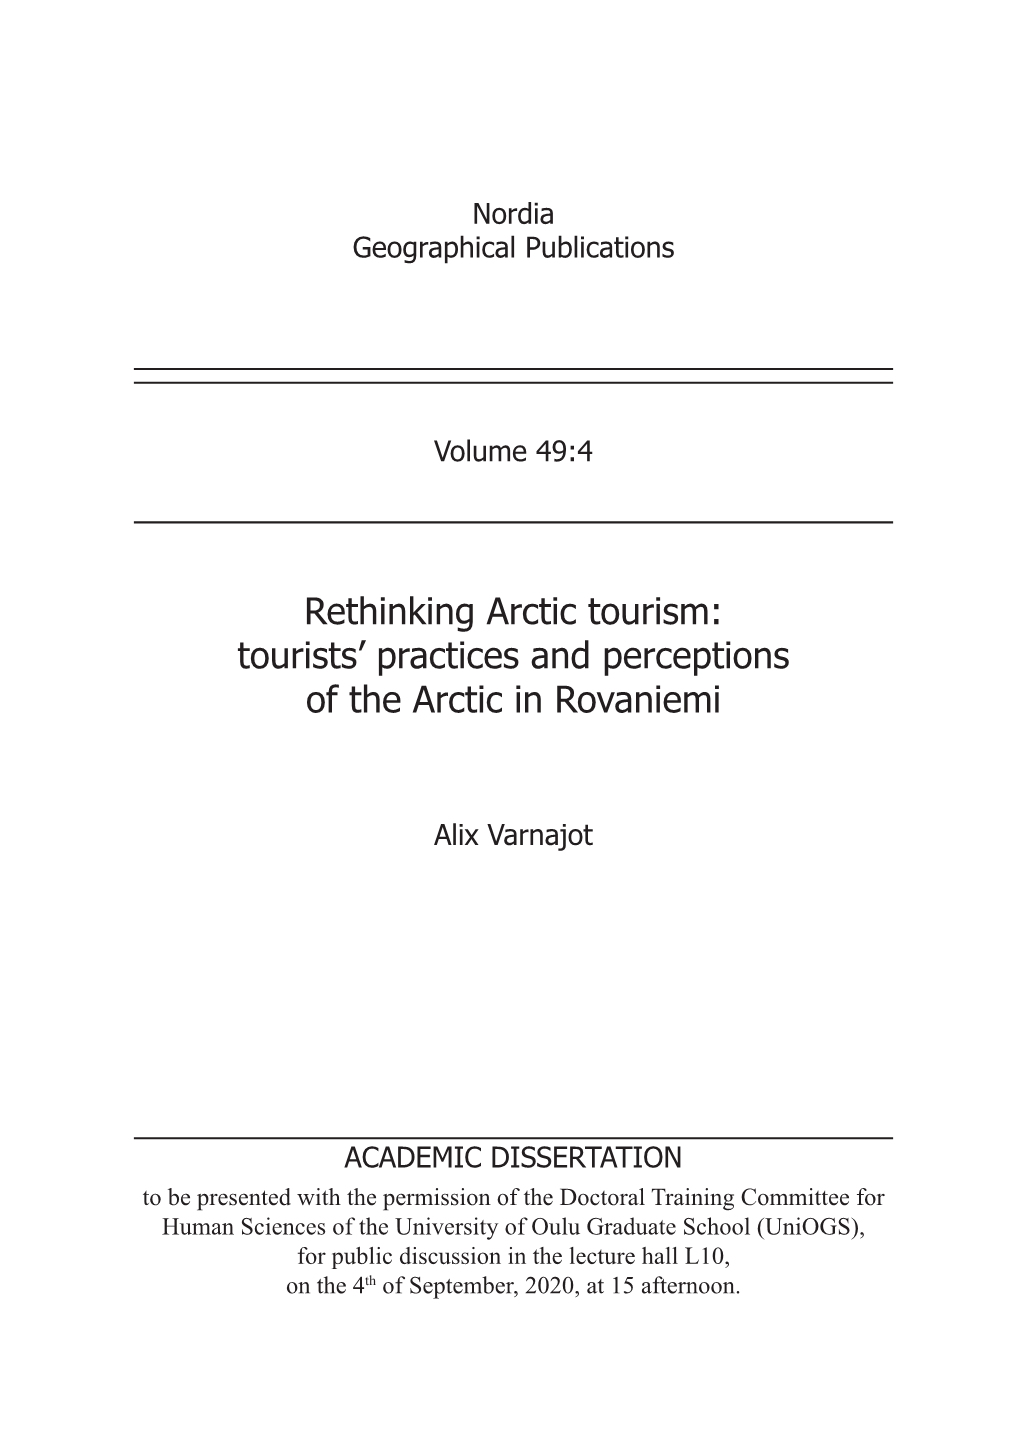 Rethinking Arctic Tourism: Tourists’ Practices and Perceptions of the Arctic in Rovaniemi